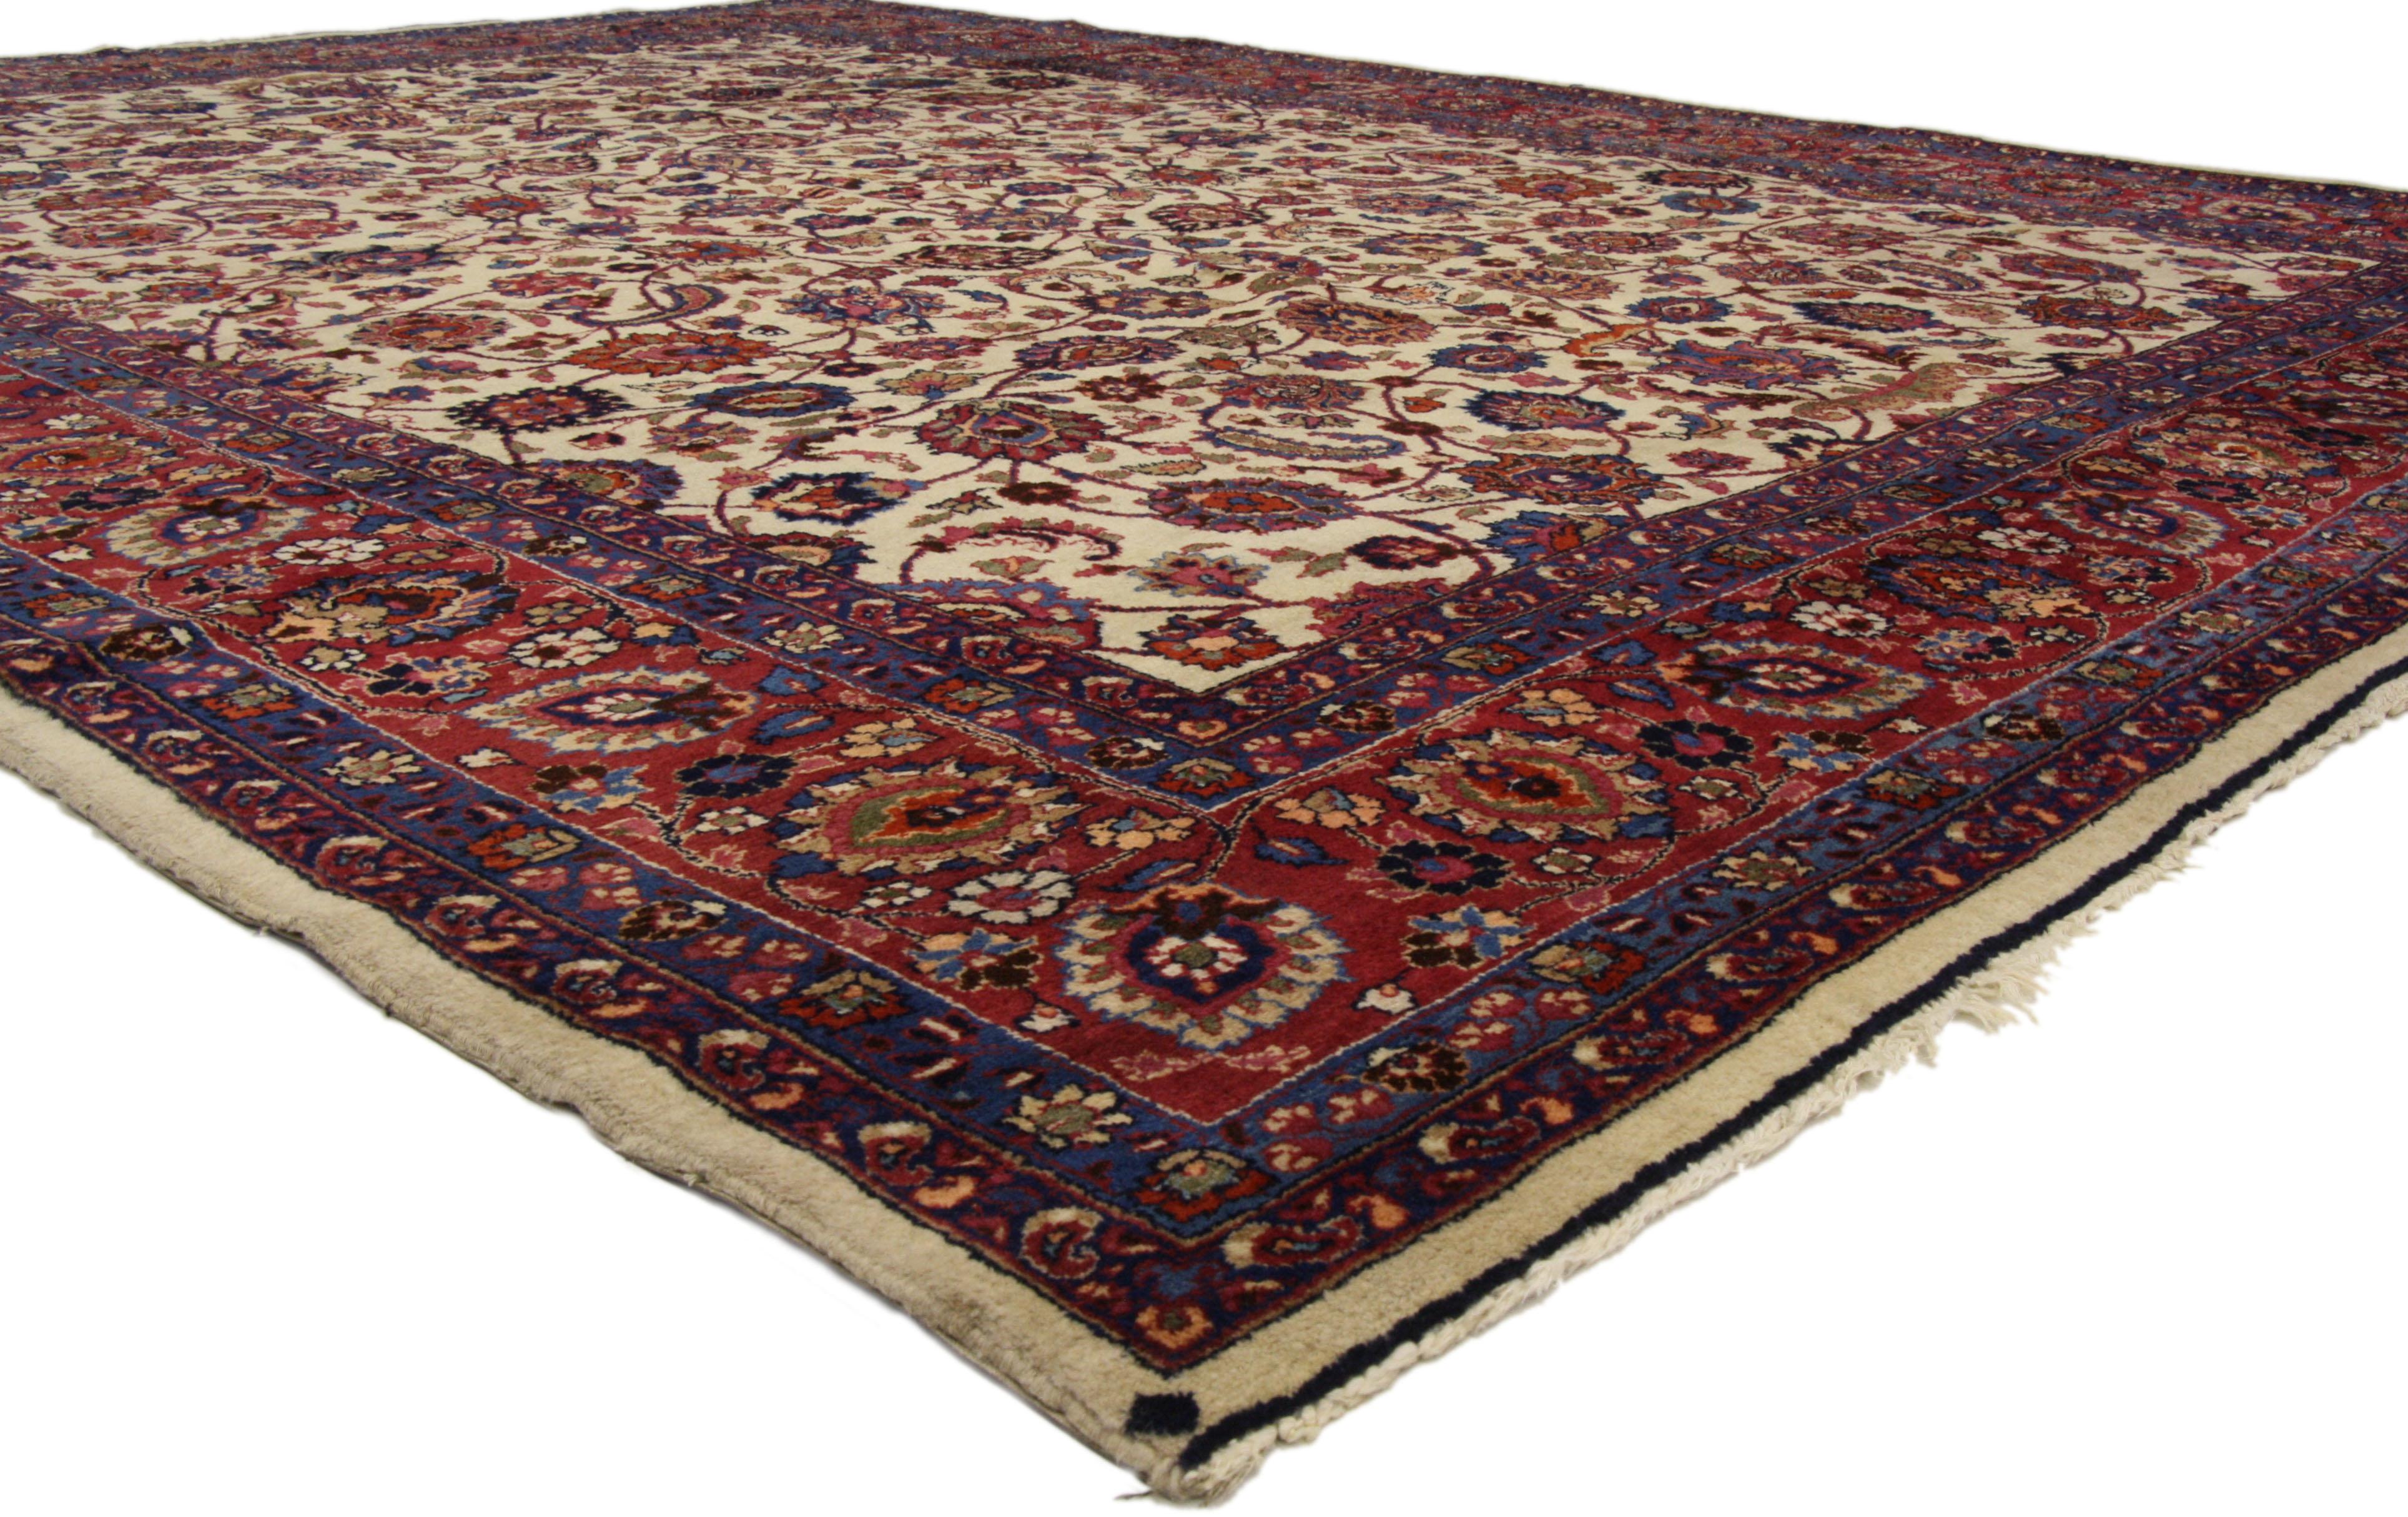 74041, antique Persian Mashhad rug with traditional style. This hand-knotted wool antique Persian Mashhad rug with traditional style features an allover pattern surrounded by a classic border creating a well-balanced and timeless design. This